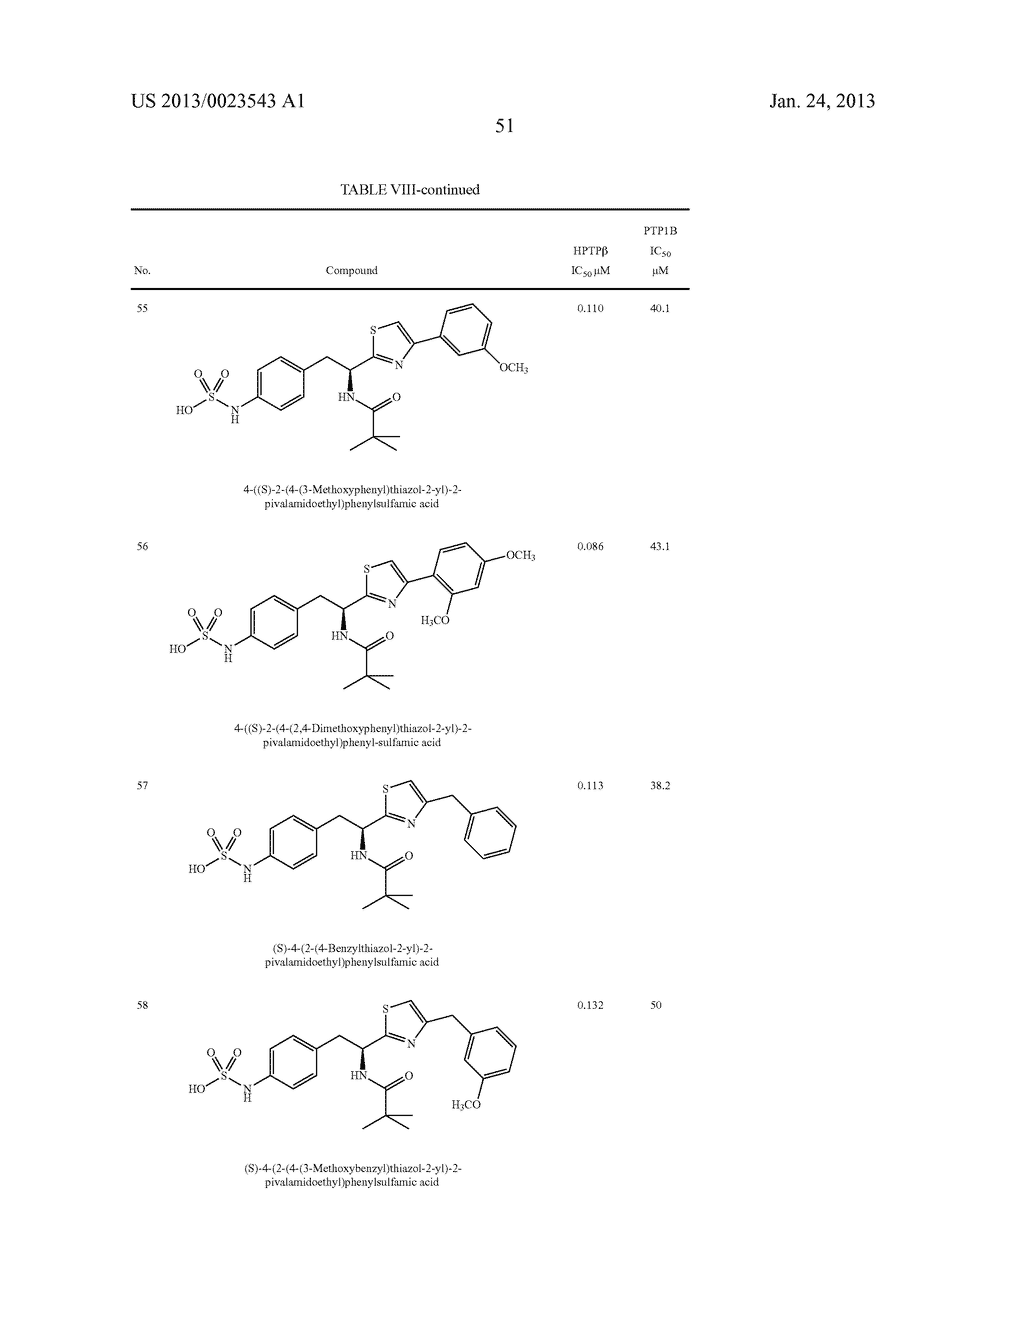 HUMAN PROTEIN TYROSINE PHOSPHATASE INHIBITORS AND METHODS OF USE - diagram, schematic, and image 52